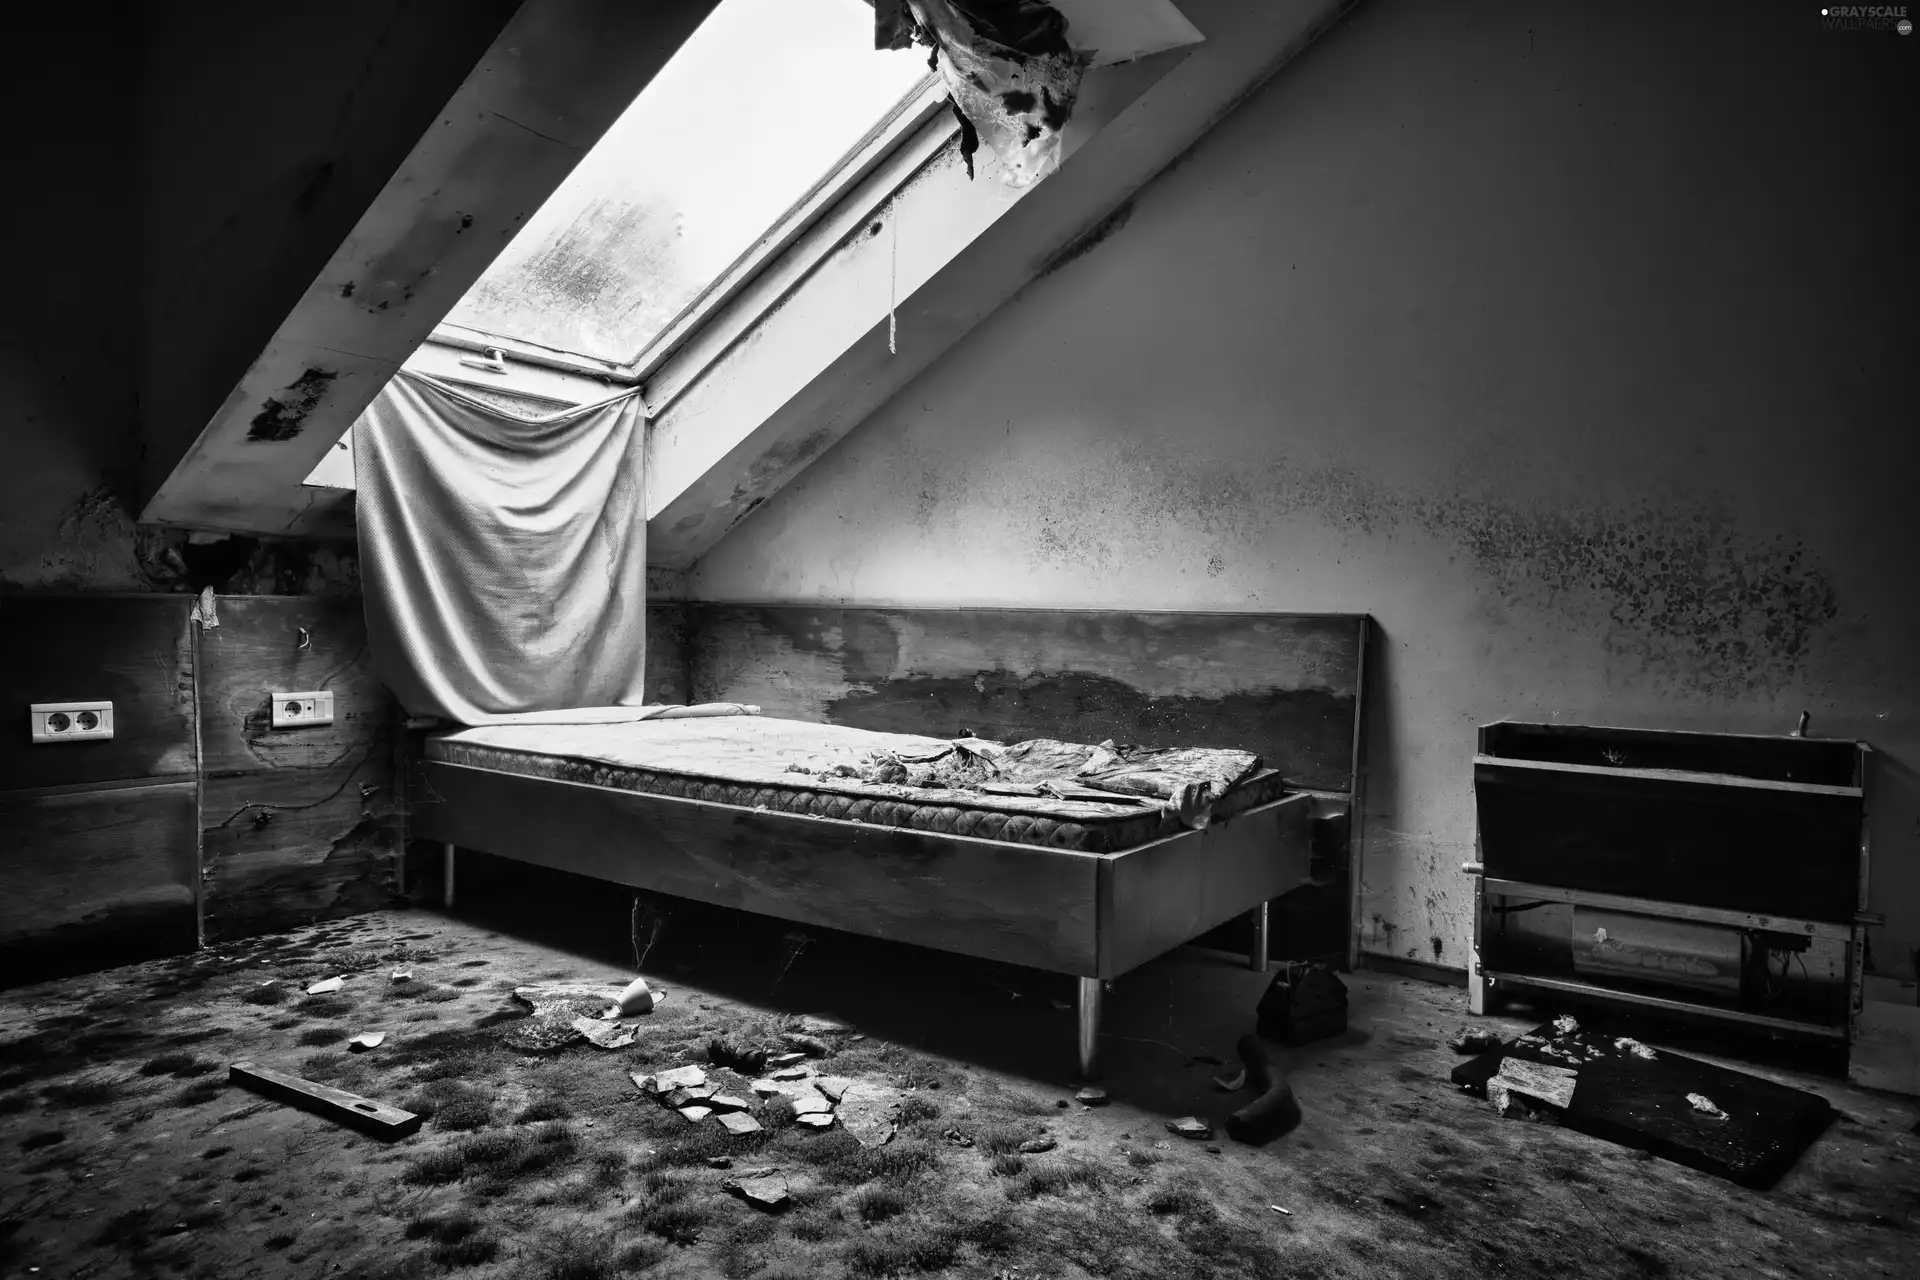 White Bed, Neglected, Room